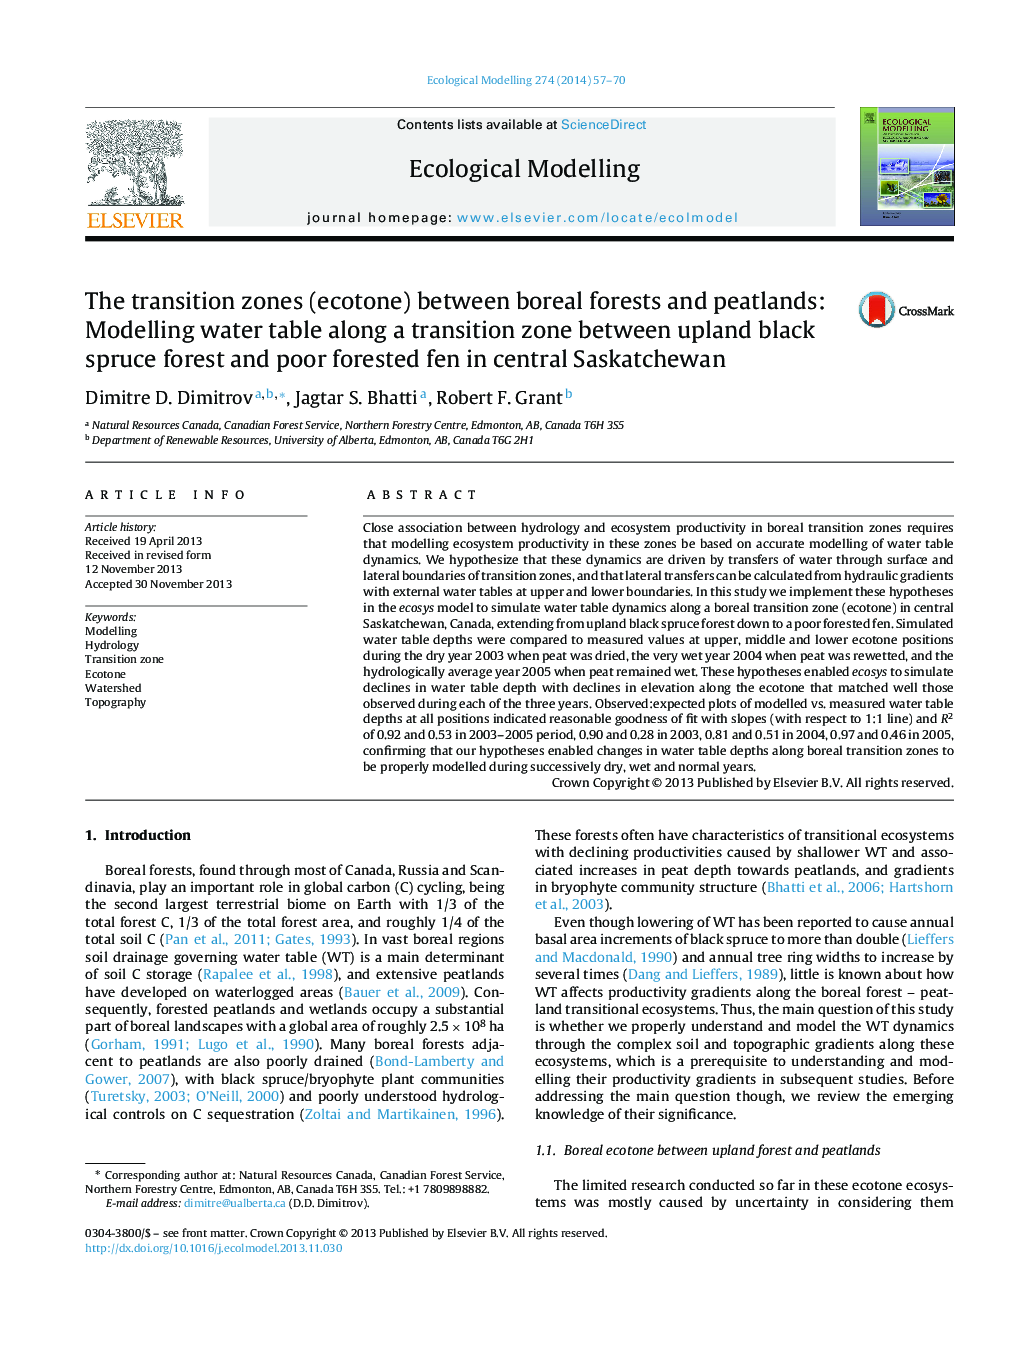 The transition zones (ecotone) between boreal forests and peatlands: Modelling water table along a transition zone between upland black spruce forest and poor forested fen in central Saskatchewan